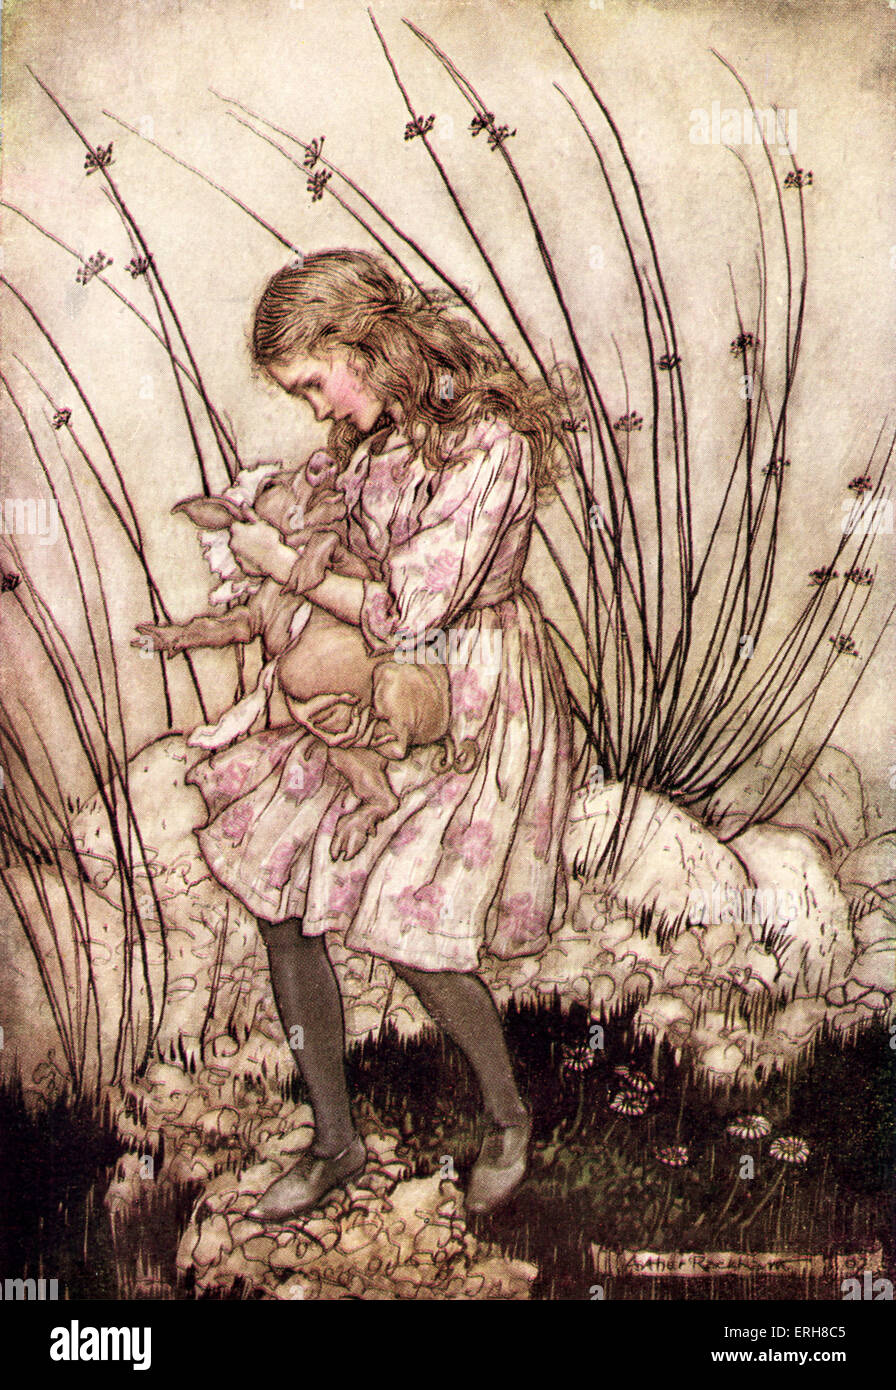 Alice 's Adventures in Wonderland by Lewis Carroll (Charles Lutwidge Dodgson). Caption reads:'It grunted again so violently that she looked down into its face with some alarm (Chapter 6- baby turns into a pig). Illustration by Arthur Rackham. (First published 1865). LC: English children's writer and mathematician 27 January 1832- 14 January 1898. AR: 1867 -1939 (Real name Reverend Charles Lutwidge Dodgson) English author: 27 January 1832 - 14 January 1898. Stock Photo